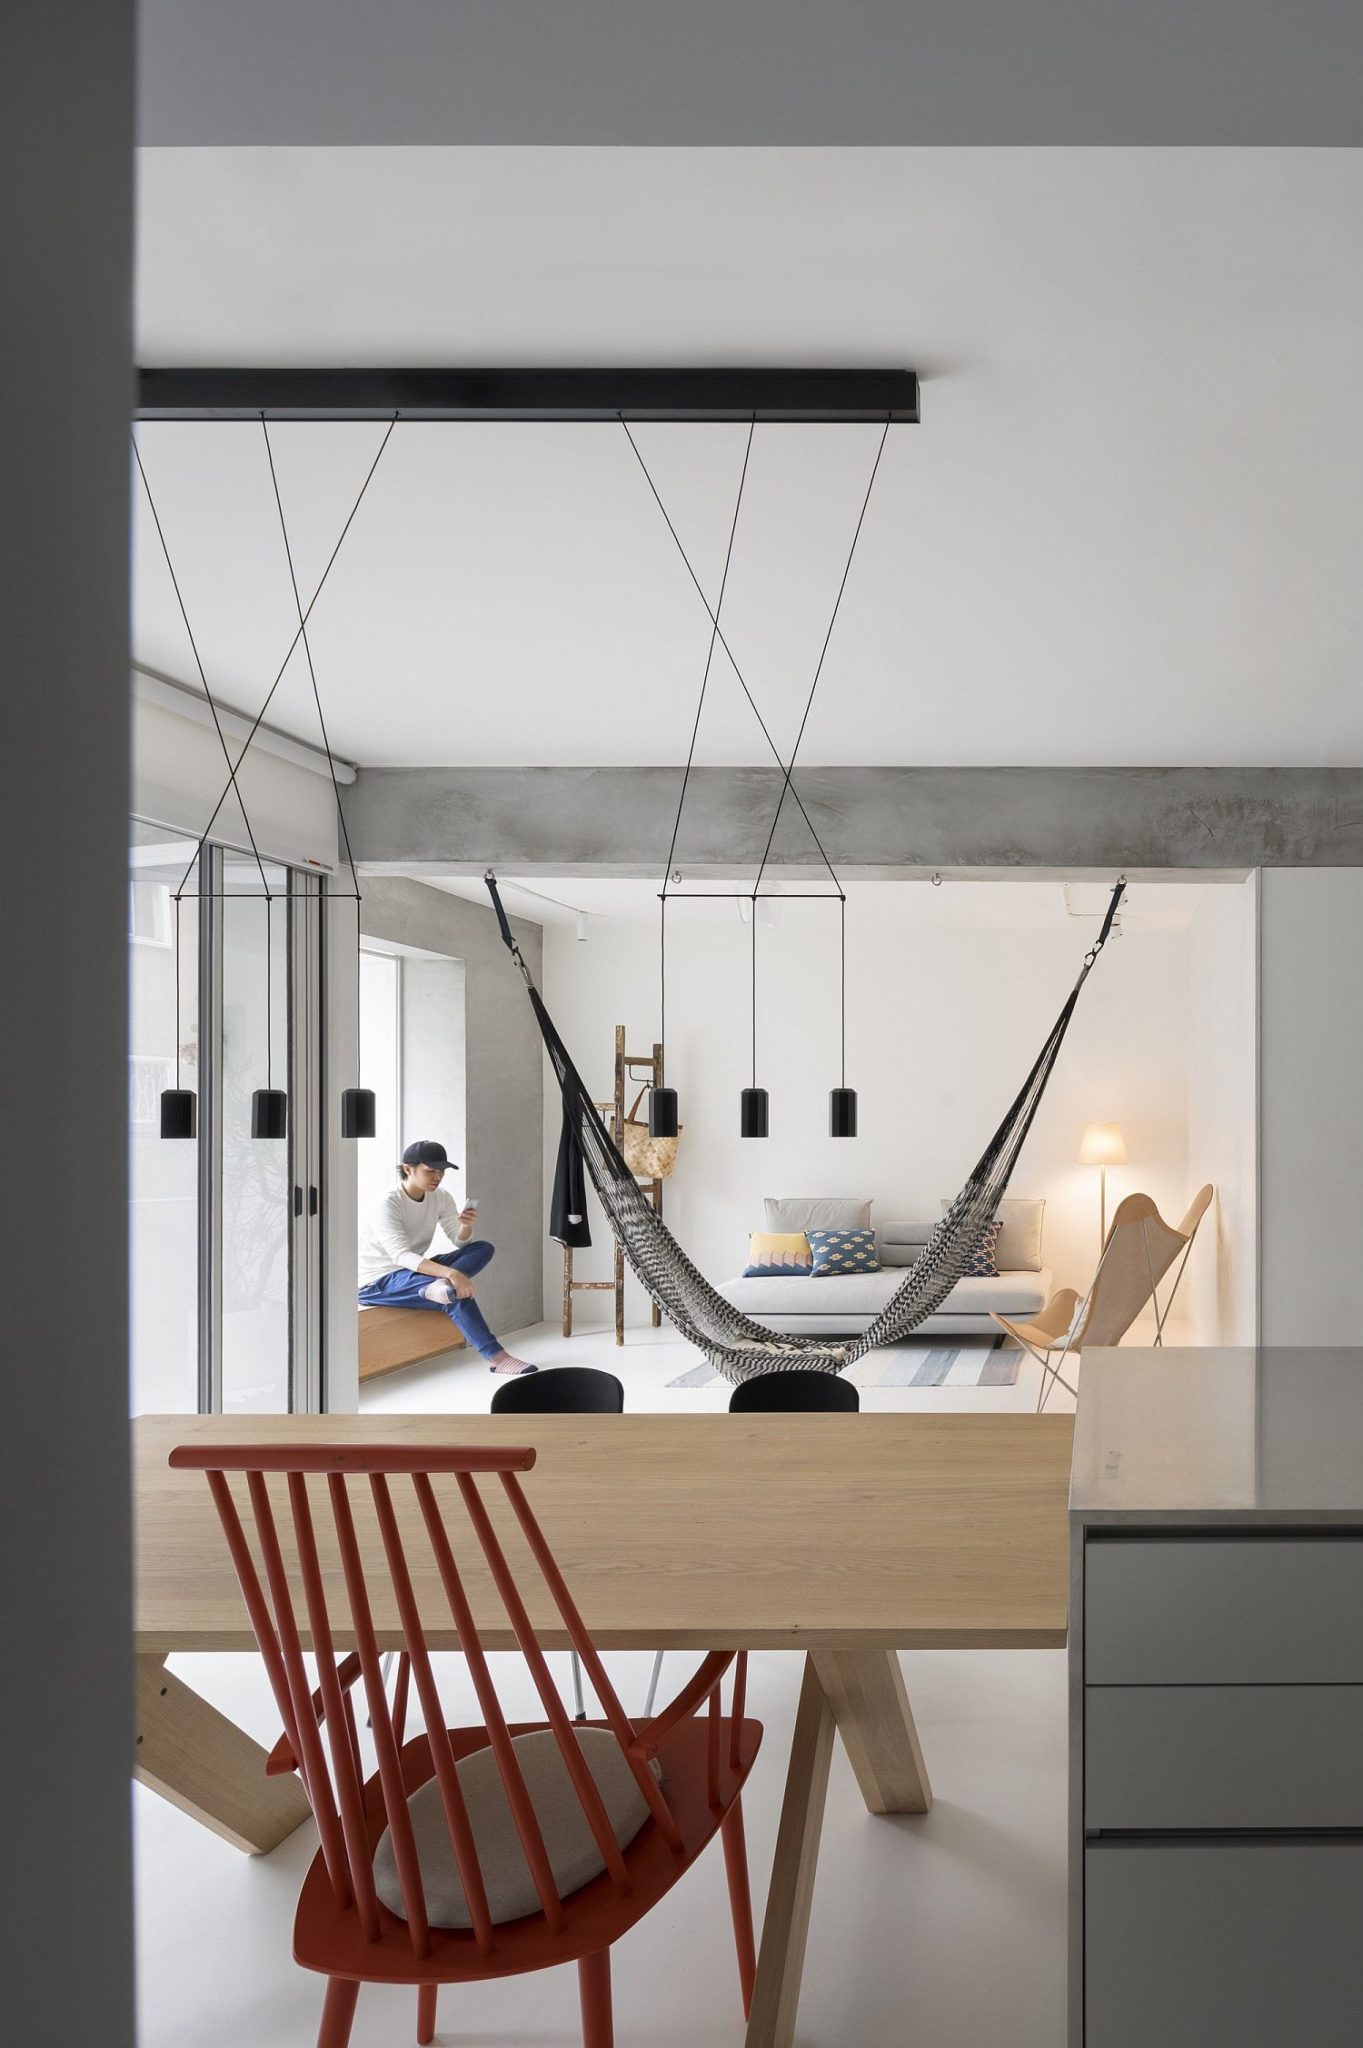 Dark pendants add contrast and sculptural style to the interior